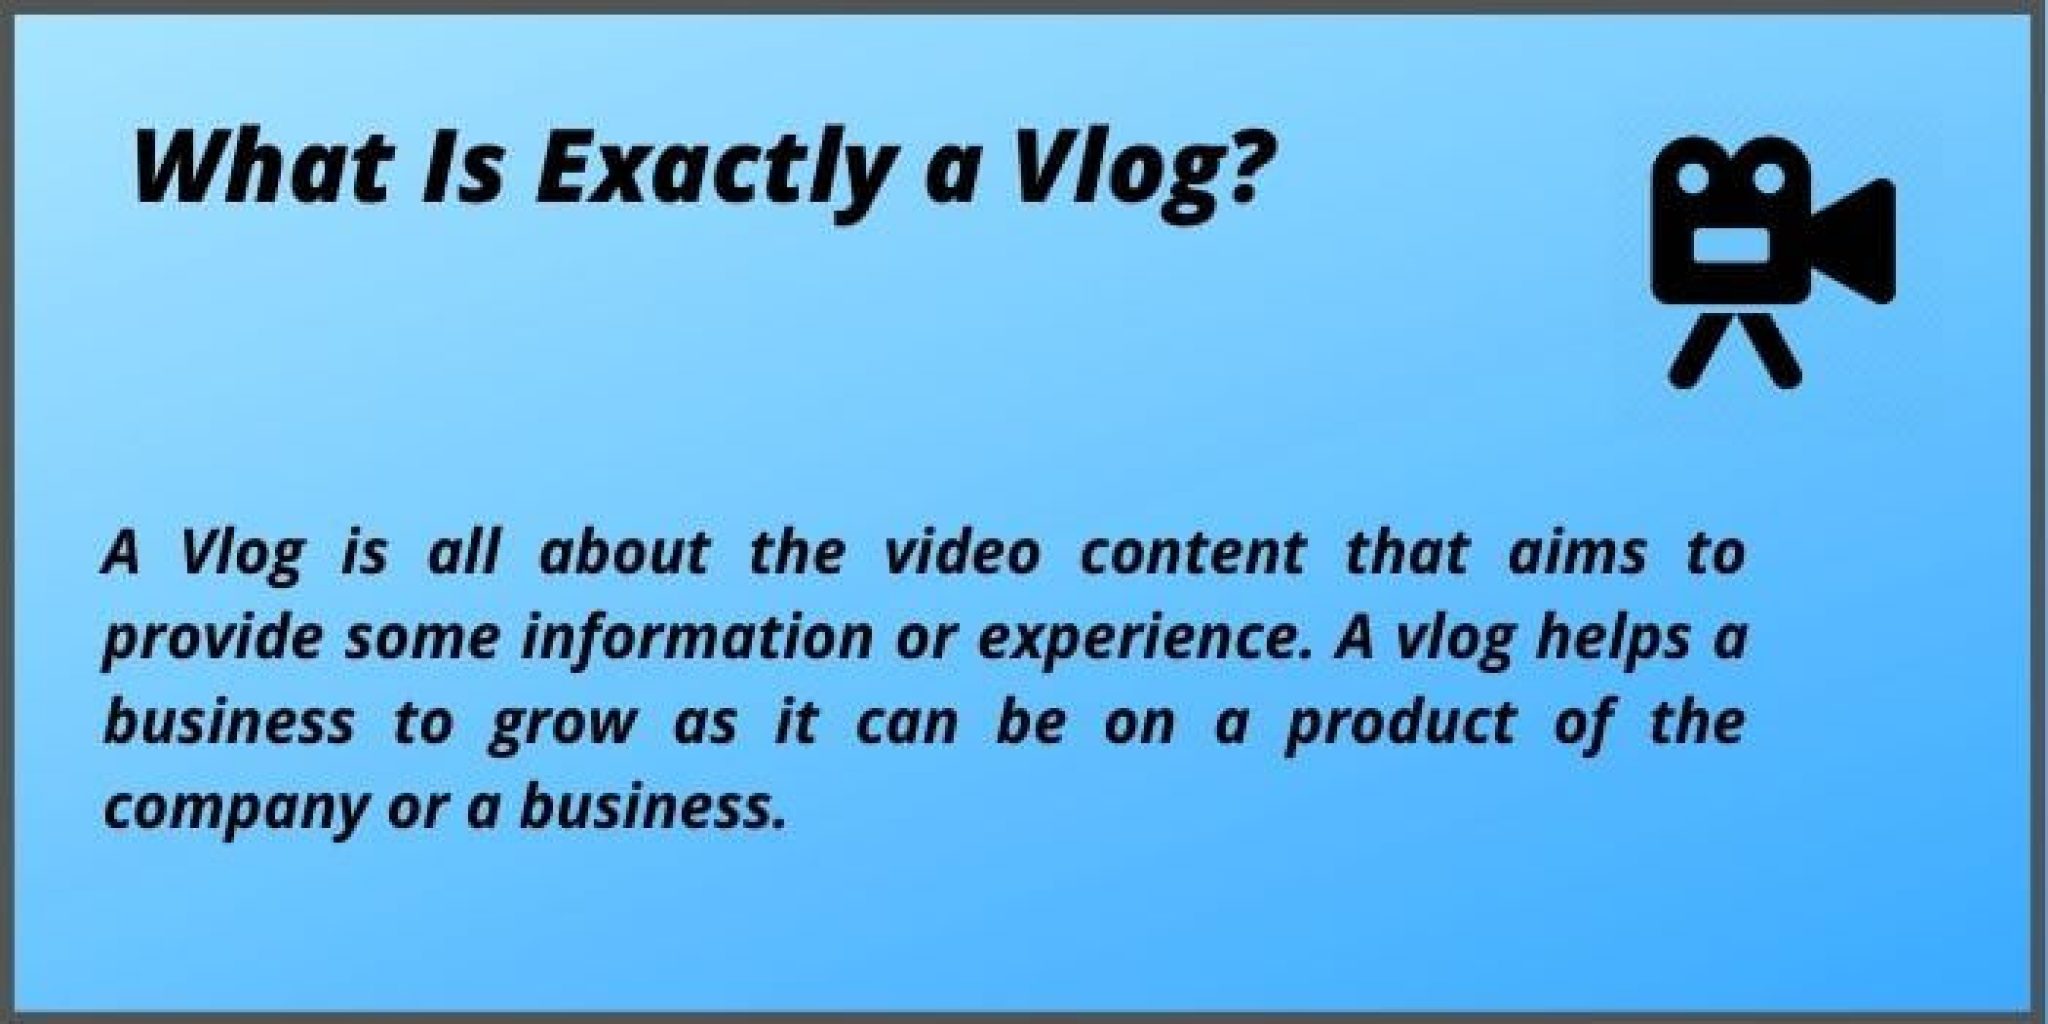 Blog Vs Vlog What is the difference between Blog and Vlog